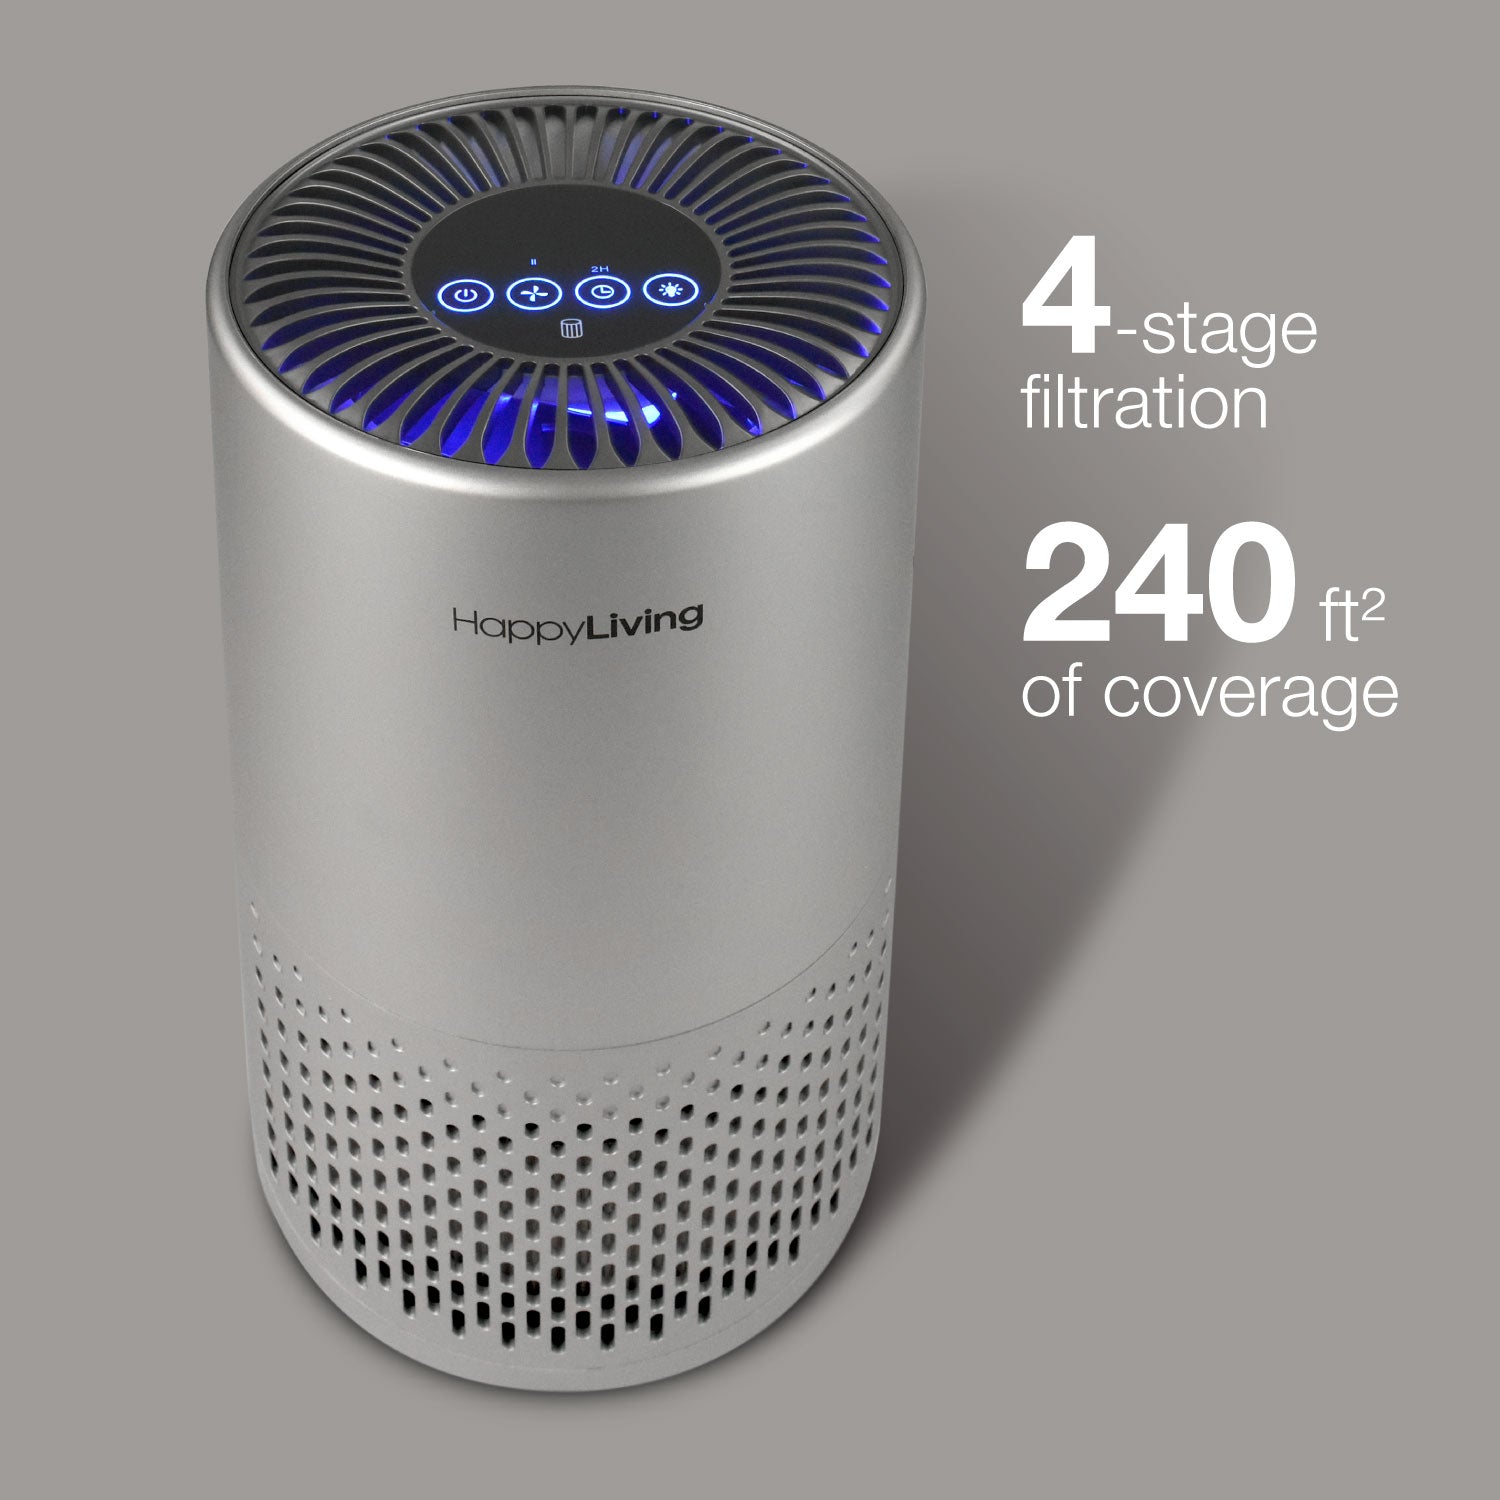 An image showing how the gray air purifier has 4 stages and 240 square feet of coverage.